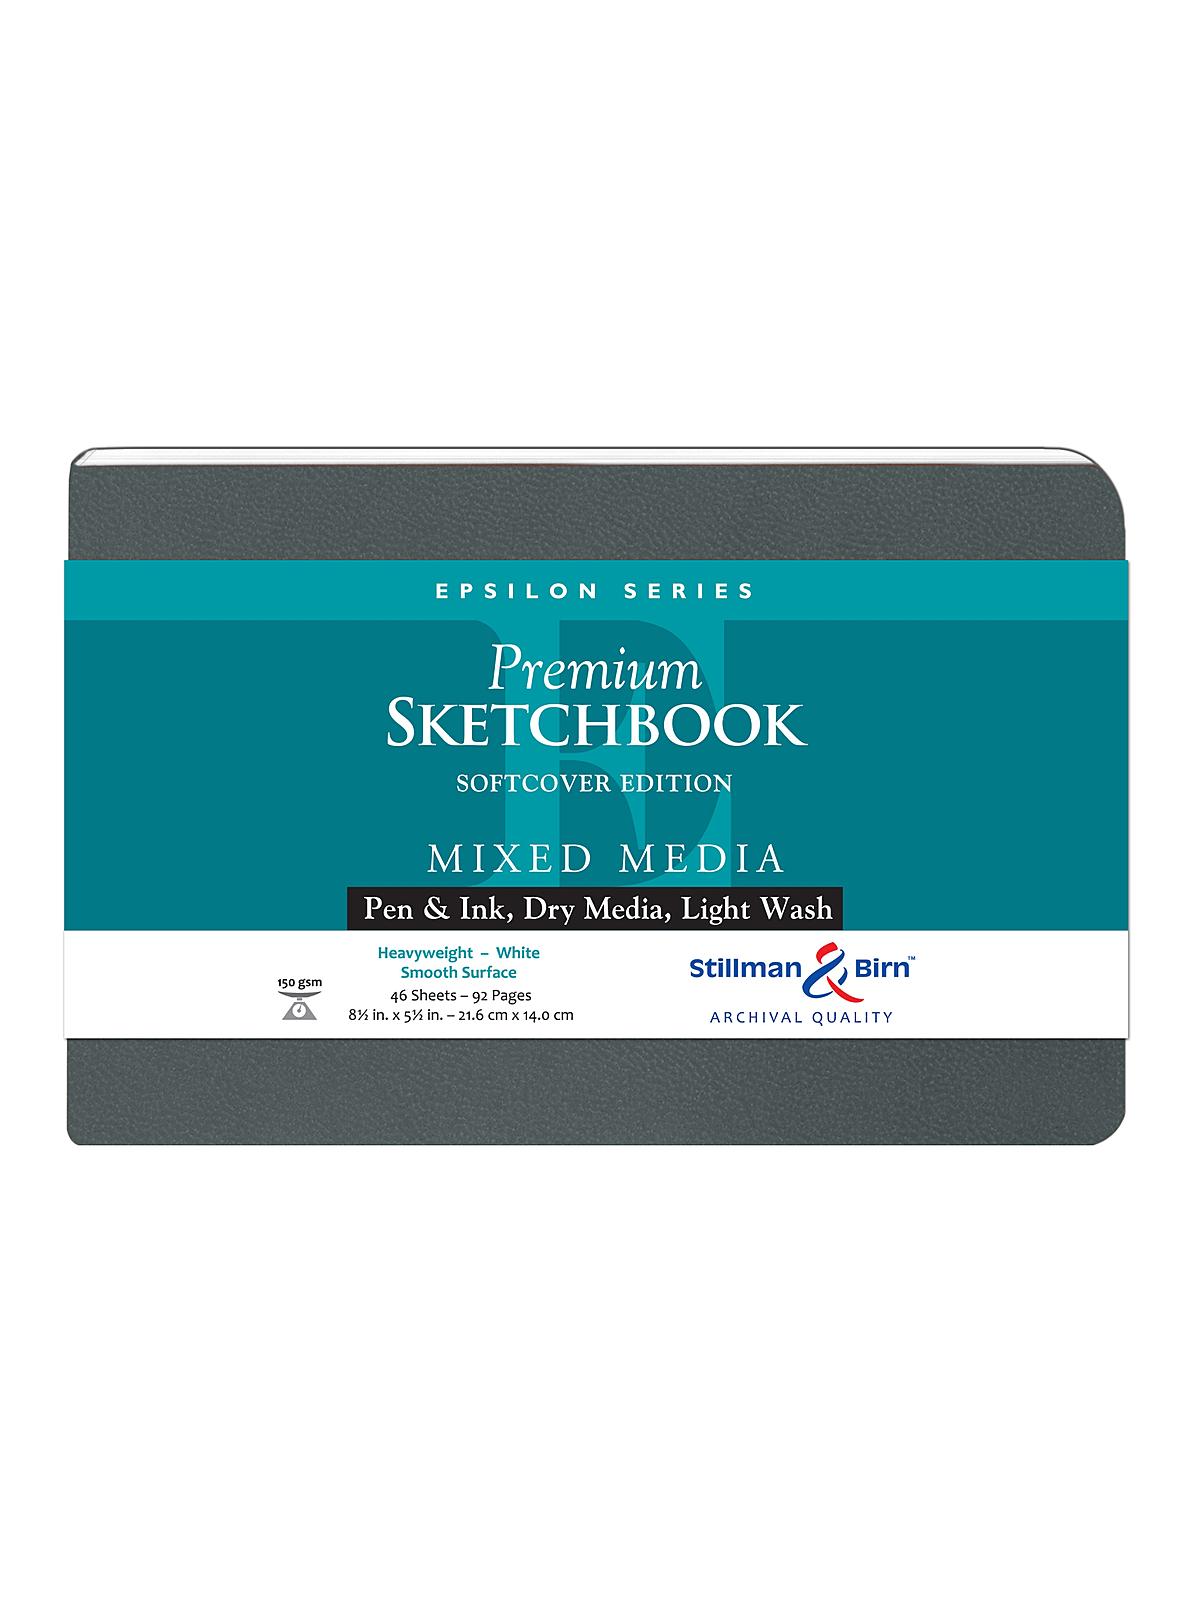 Epsilon Series Softcover Sketchbooks 8.5 In. X 5.5 In. Landscape 96 Pages